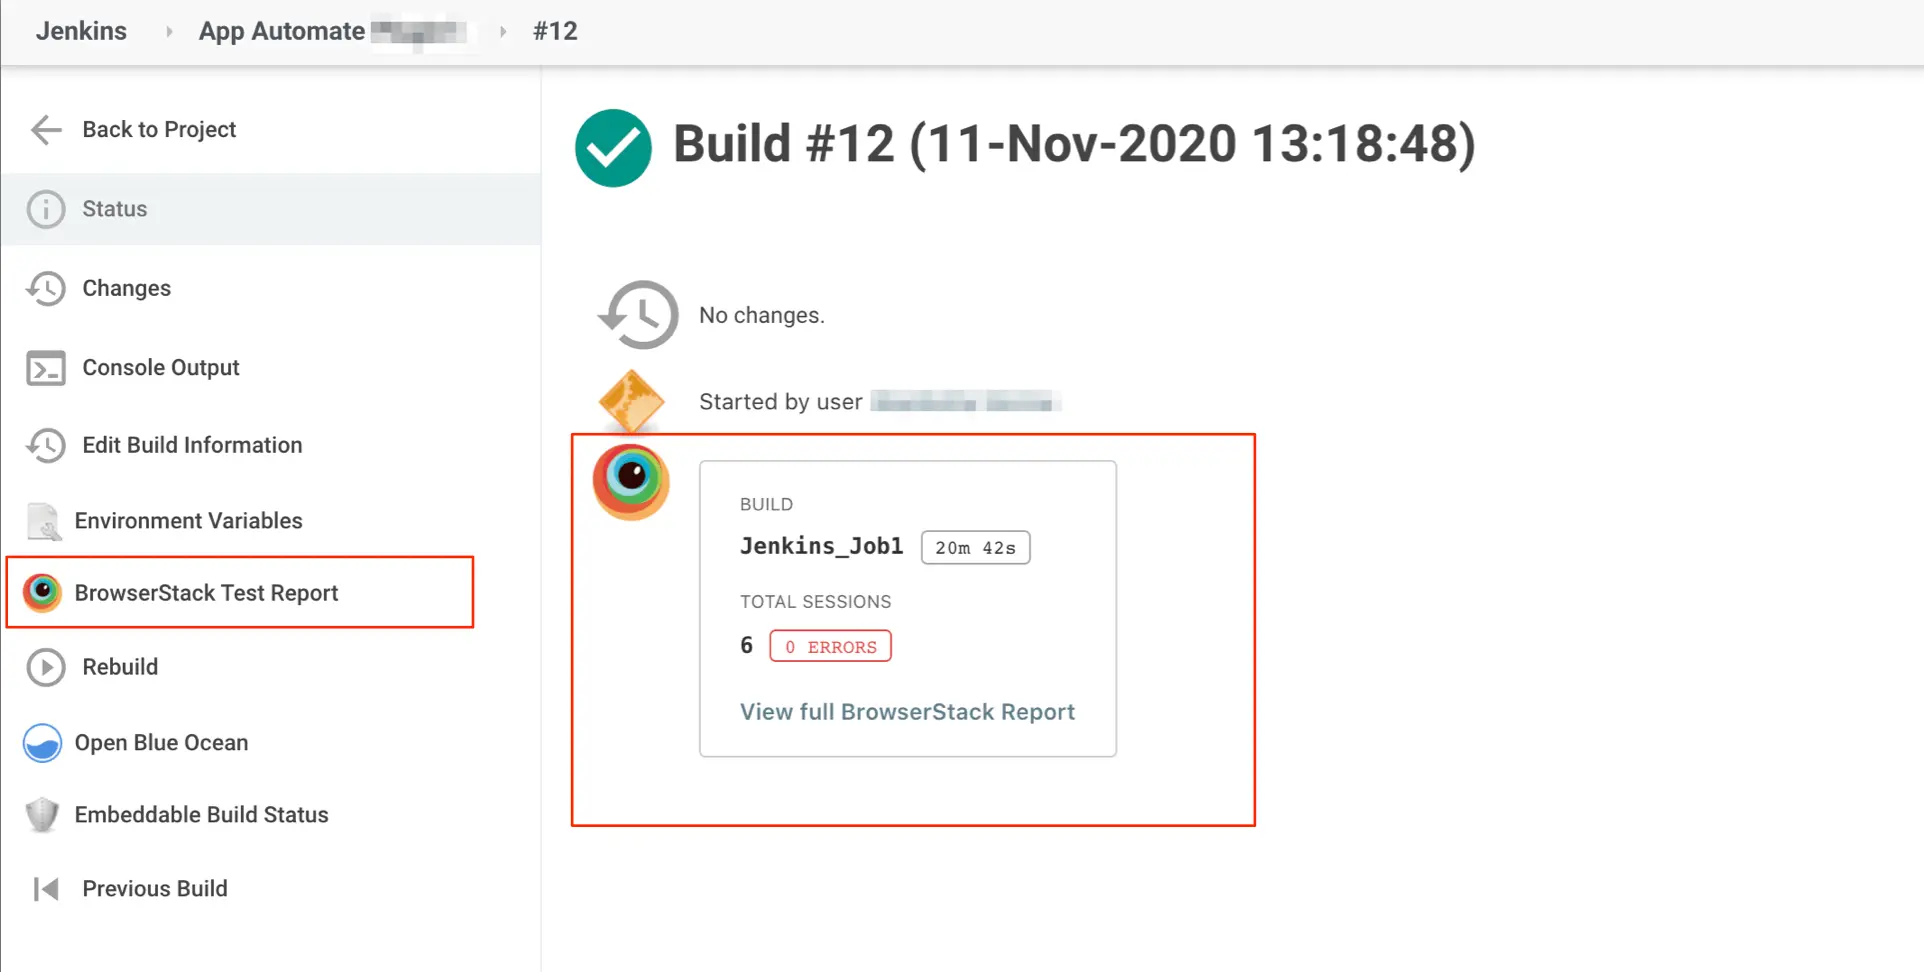 With this integration you can now view the results of your Appium tests within Jenkins